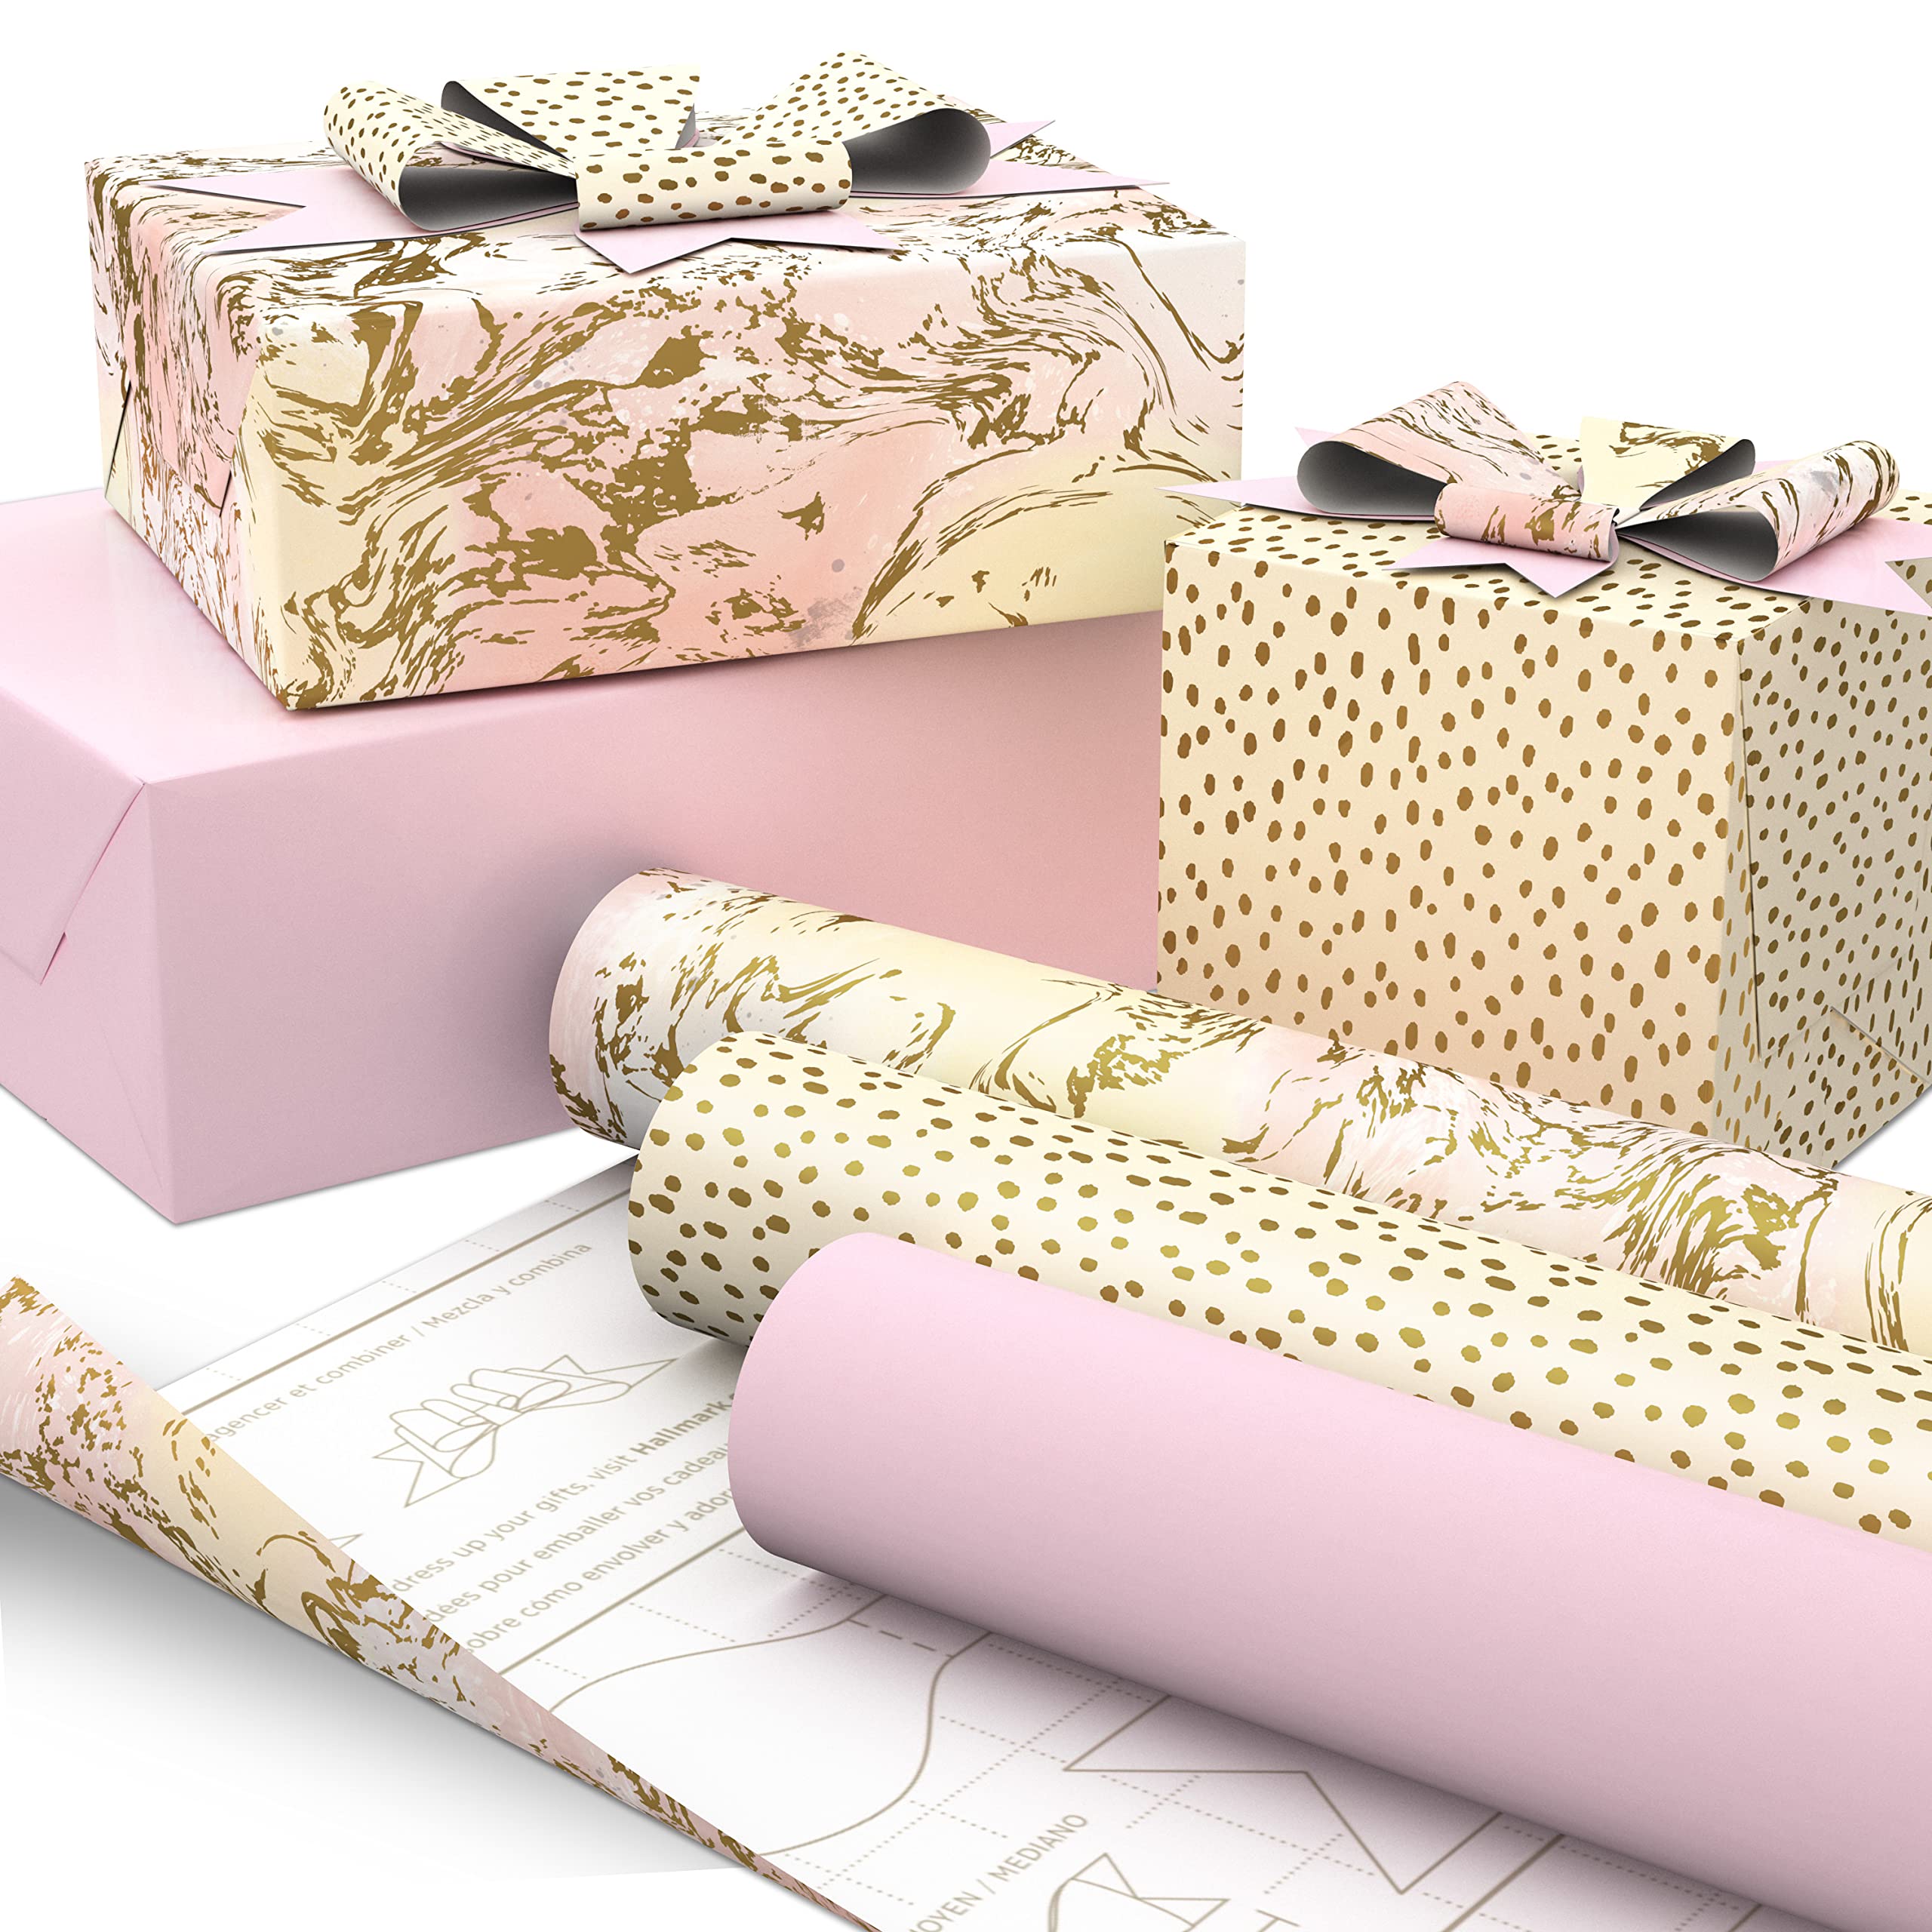 Hallmark Wrapping Paper with Cutlines on Reverse (6 Rolls: 135 Square Feet Total) Pink, Gold, Stripes, Kraft Brown, Black and White Plaid for Birthdays, Baby Showers, Bridal Showers, Mother's Day